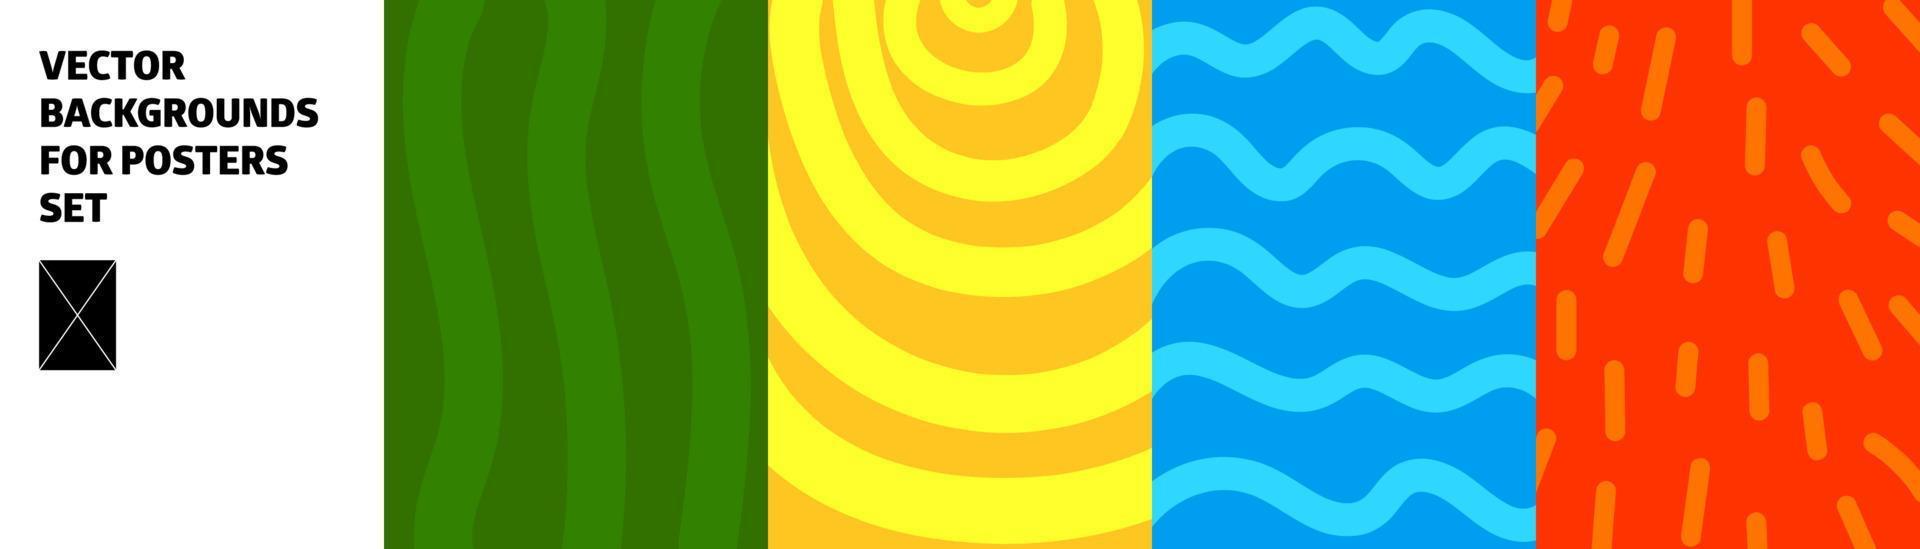 Vector background for posters. set. Yellow, green, blue, red background. Wave, sun, grass, sun rays